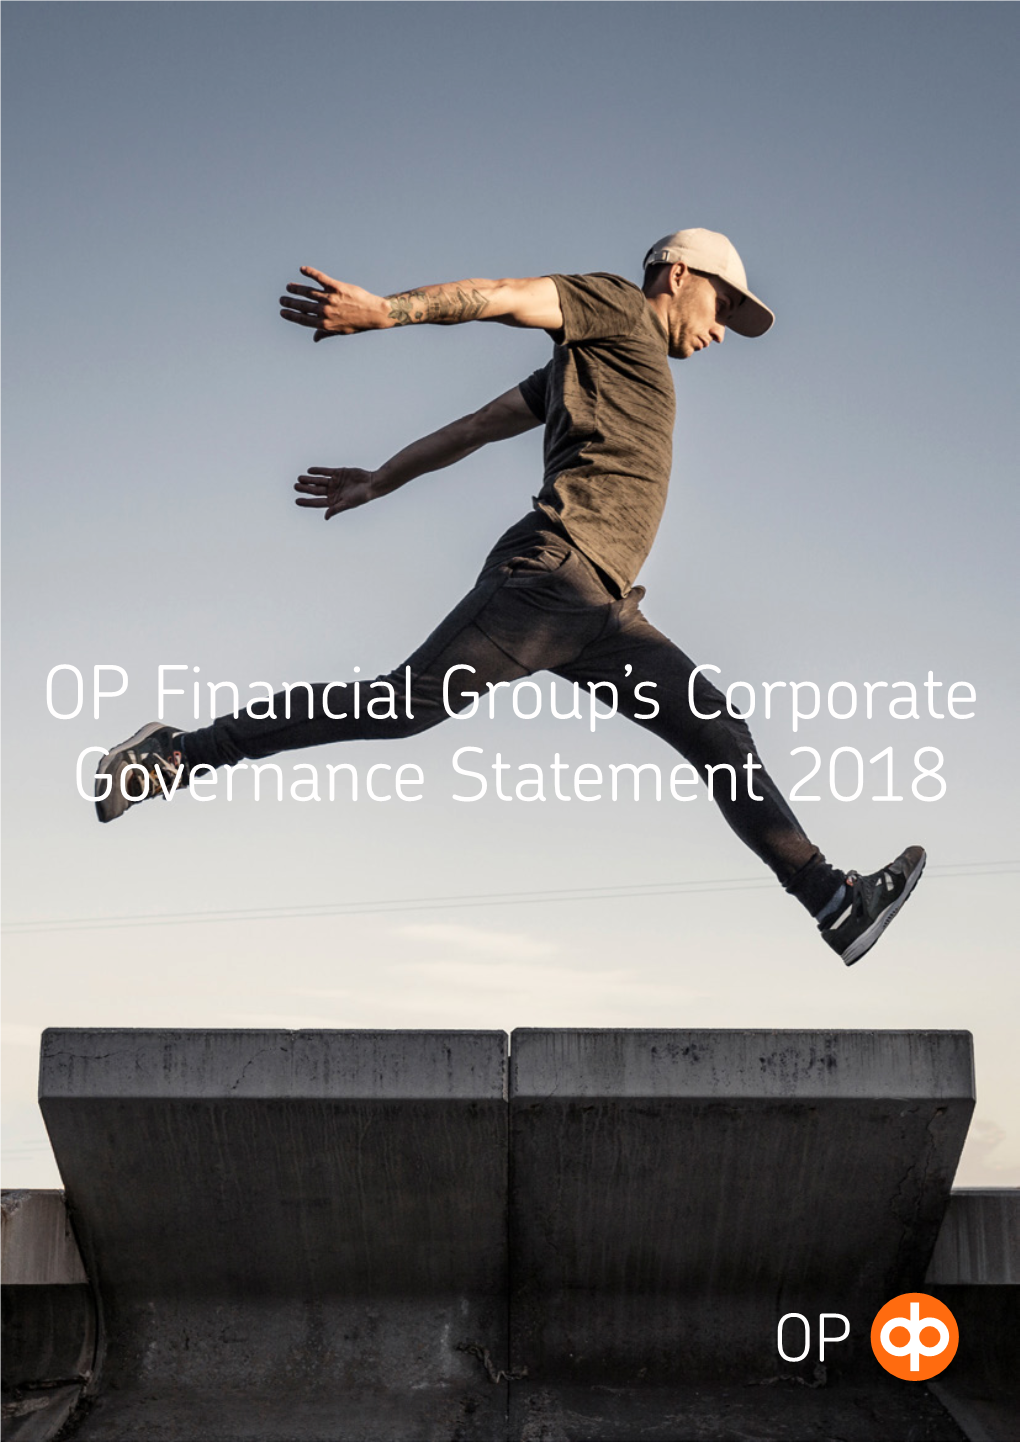 Op Financial Group's Corporate Governance Statement 2018